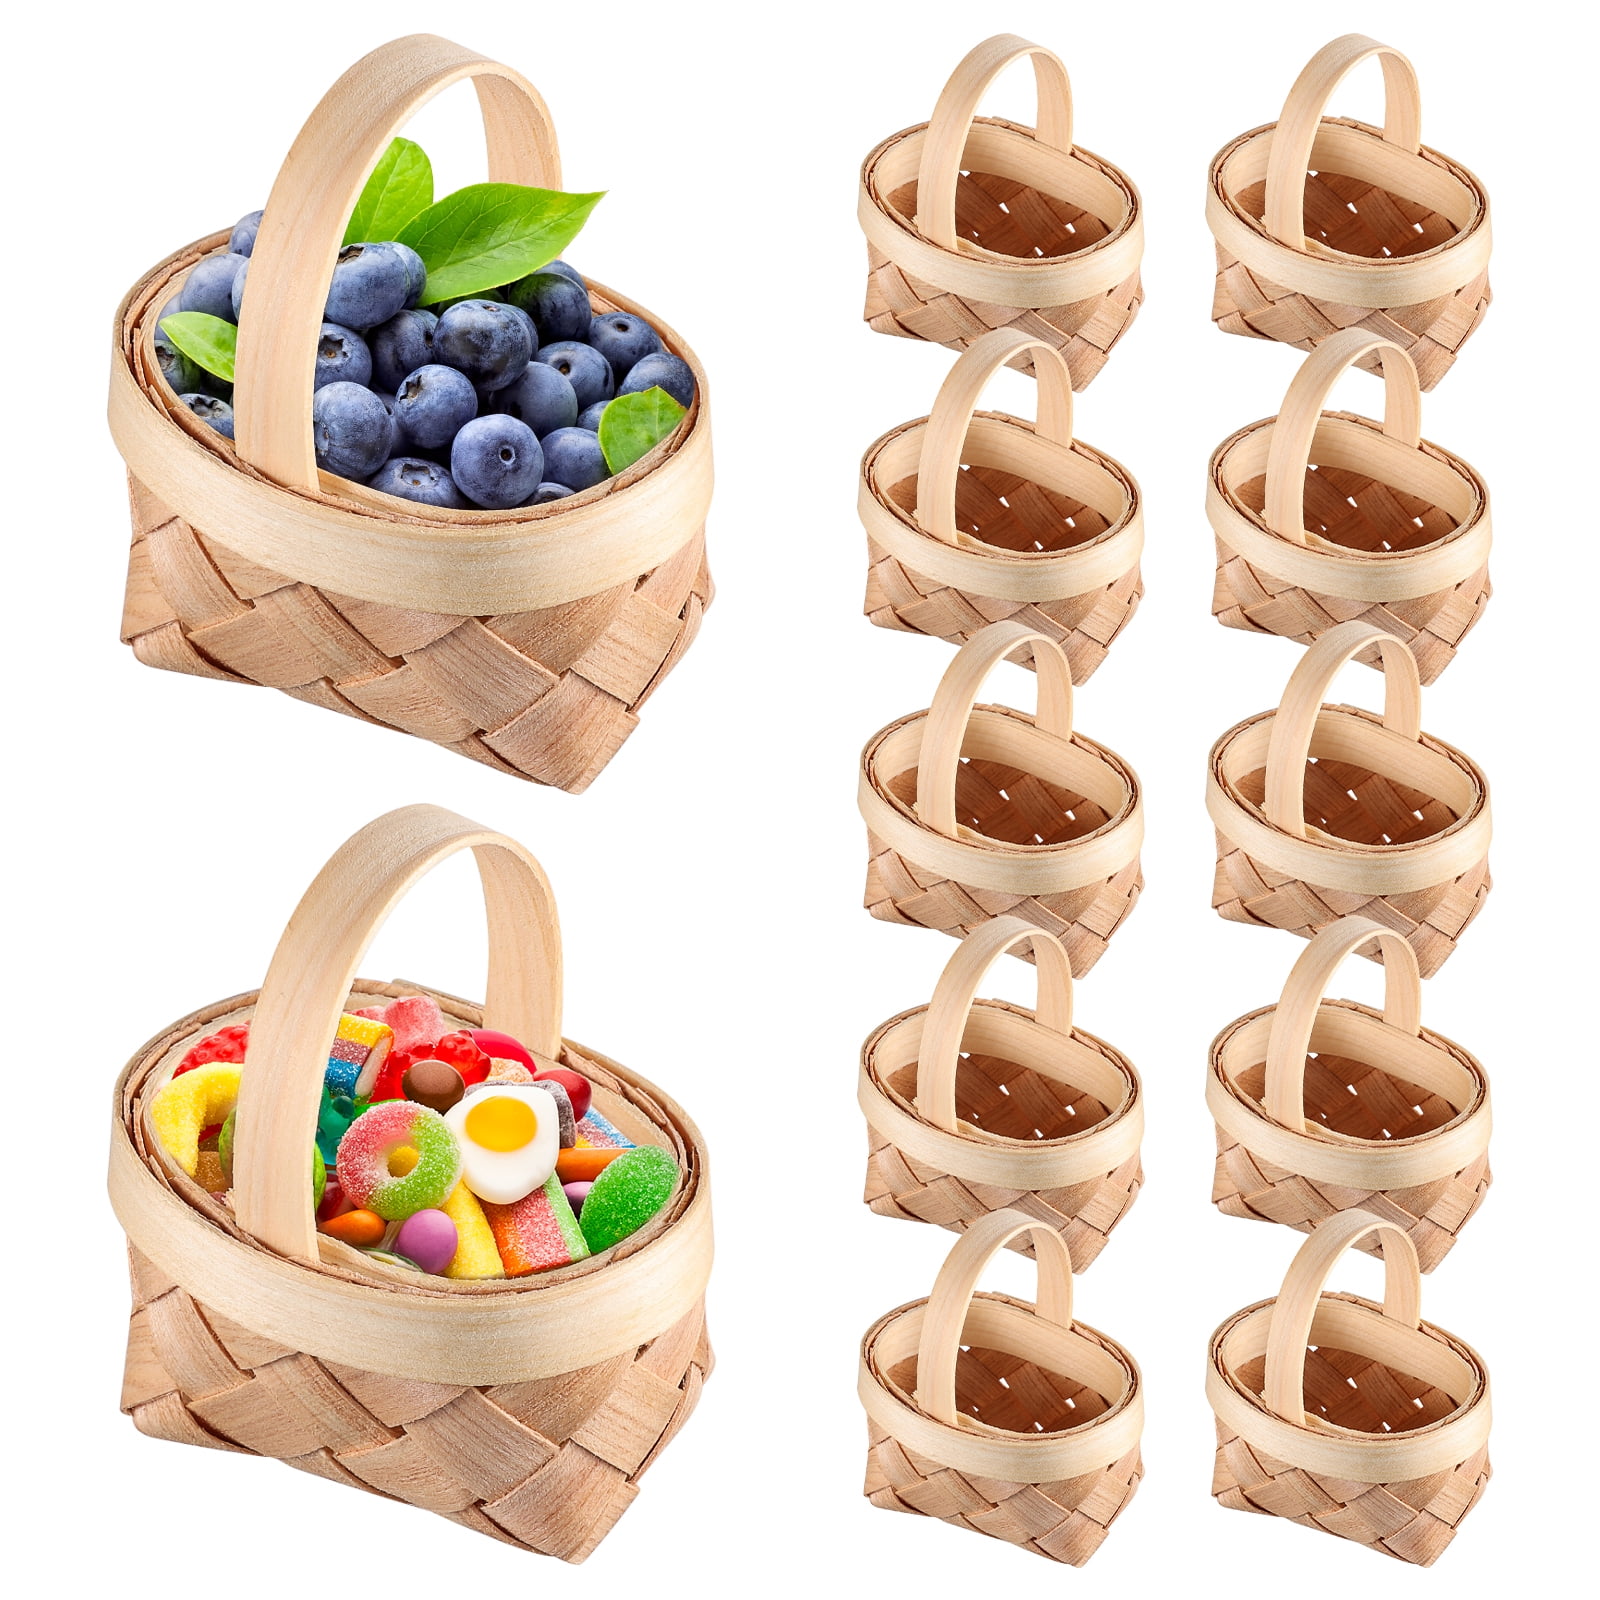 Abaodam 12 Pcs Small Wooden Basket Small Gift Basket Party Candy Baskets  Party Favors Baskets Small Tiny Baskets for Craft Little Picnic Basket Wood